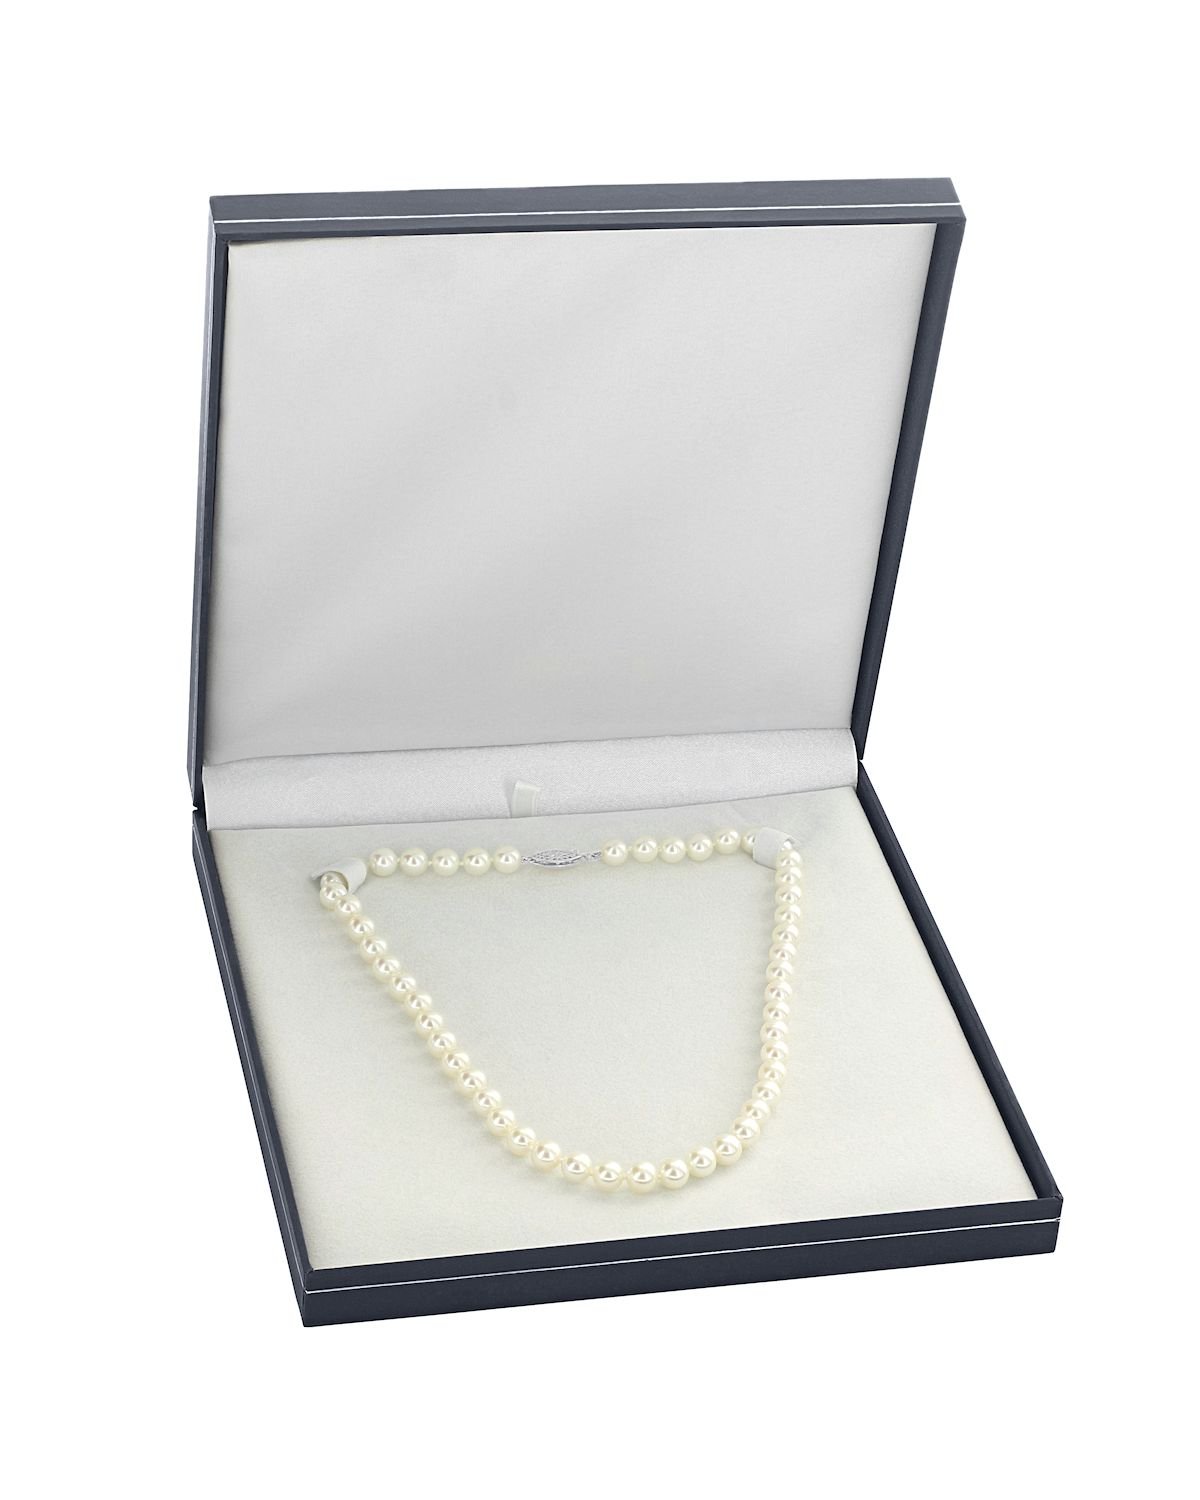 6.0-9.0mm Japanese Akoya White Pearl Necklace - Secondary Image